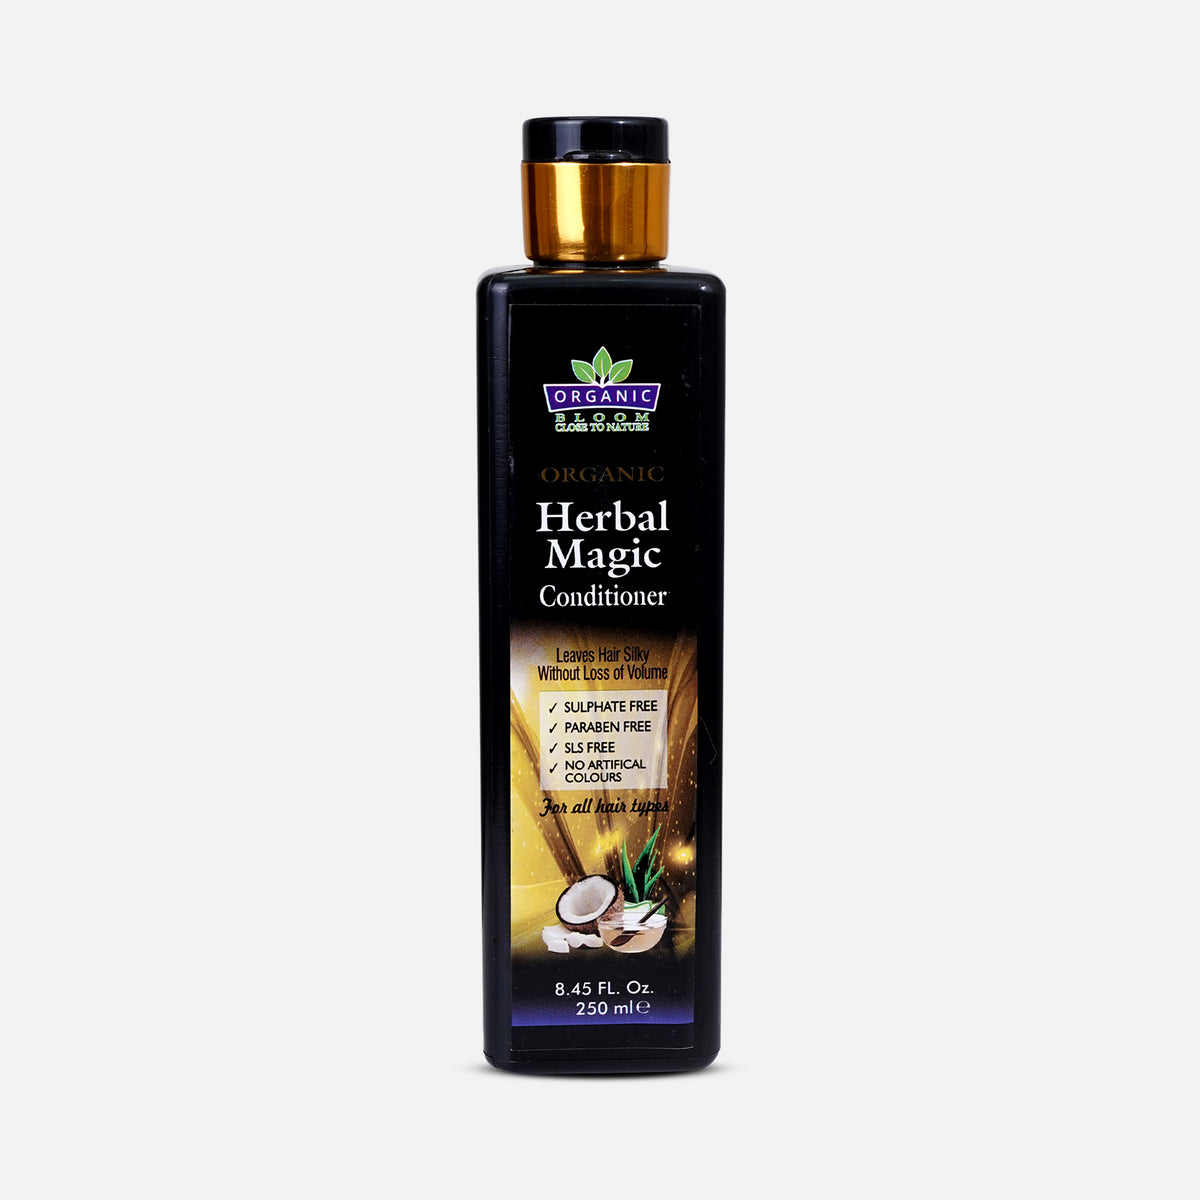 ORGANIC HERBAL MAGIC CONDITIONER - LEAVES HAIR SILKY WITHOUT LOSS OF VOLUME